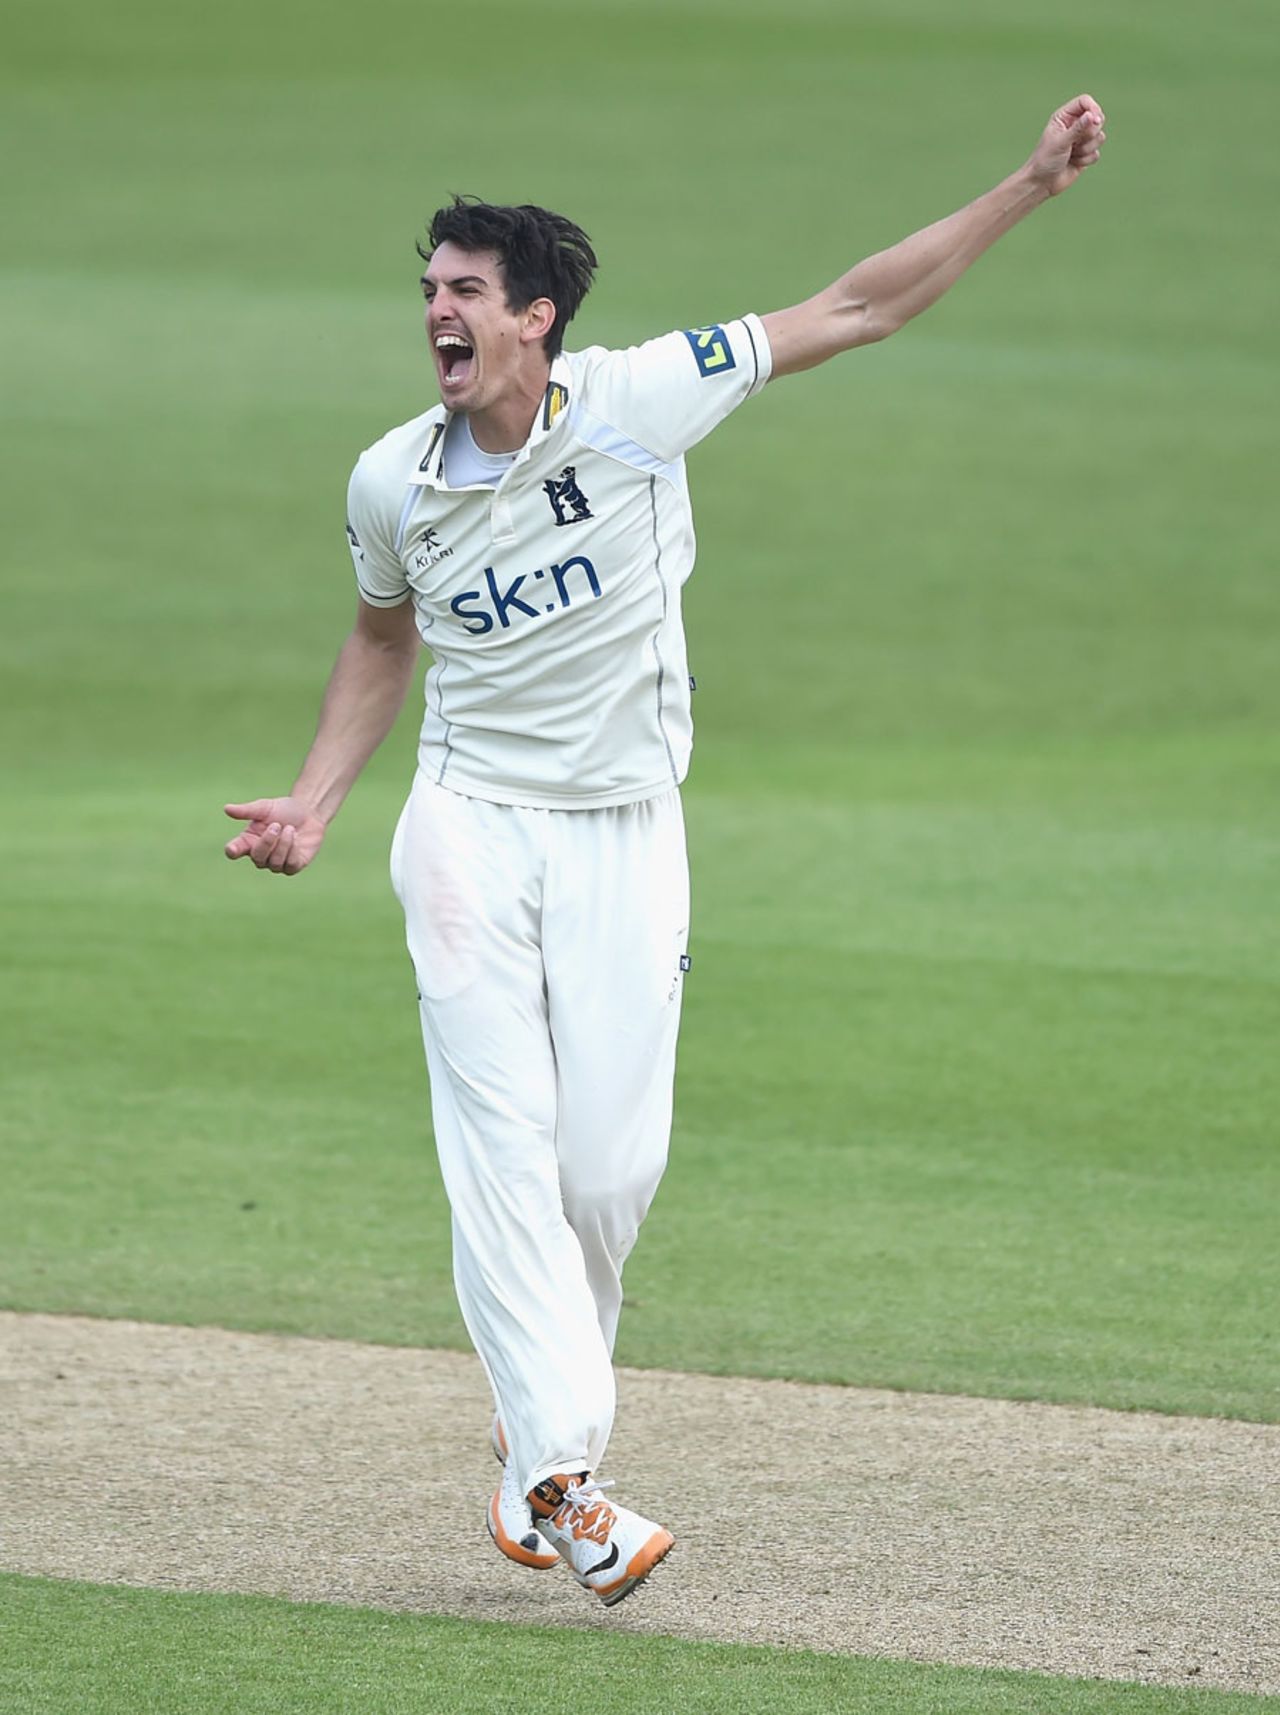 Chris Wright's 4 for 70 gave him seven wickets in the match, Nottinghamshire v Warwickshire, County Championship, Trent Bridge, 3rd day, April 29, 2014